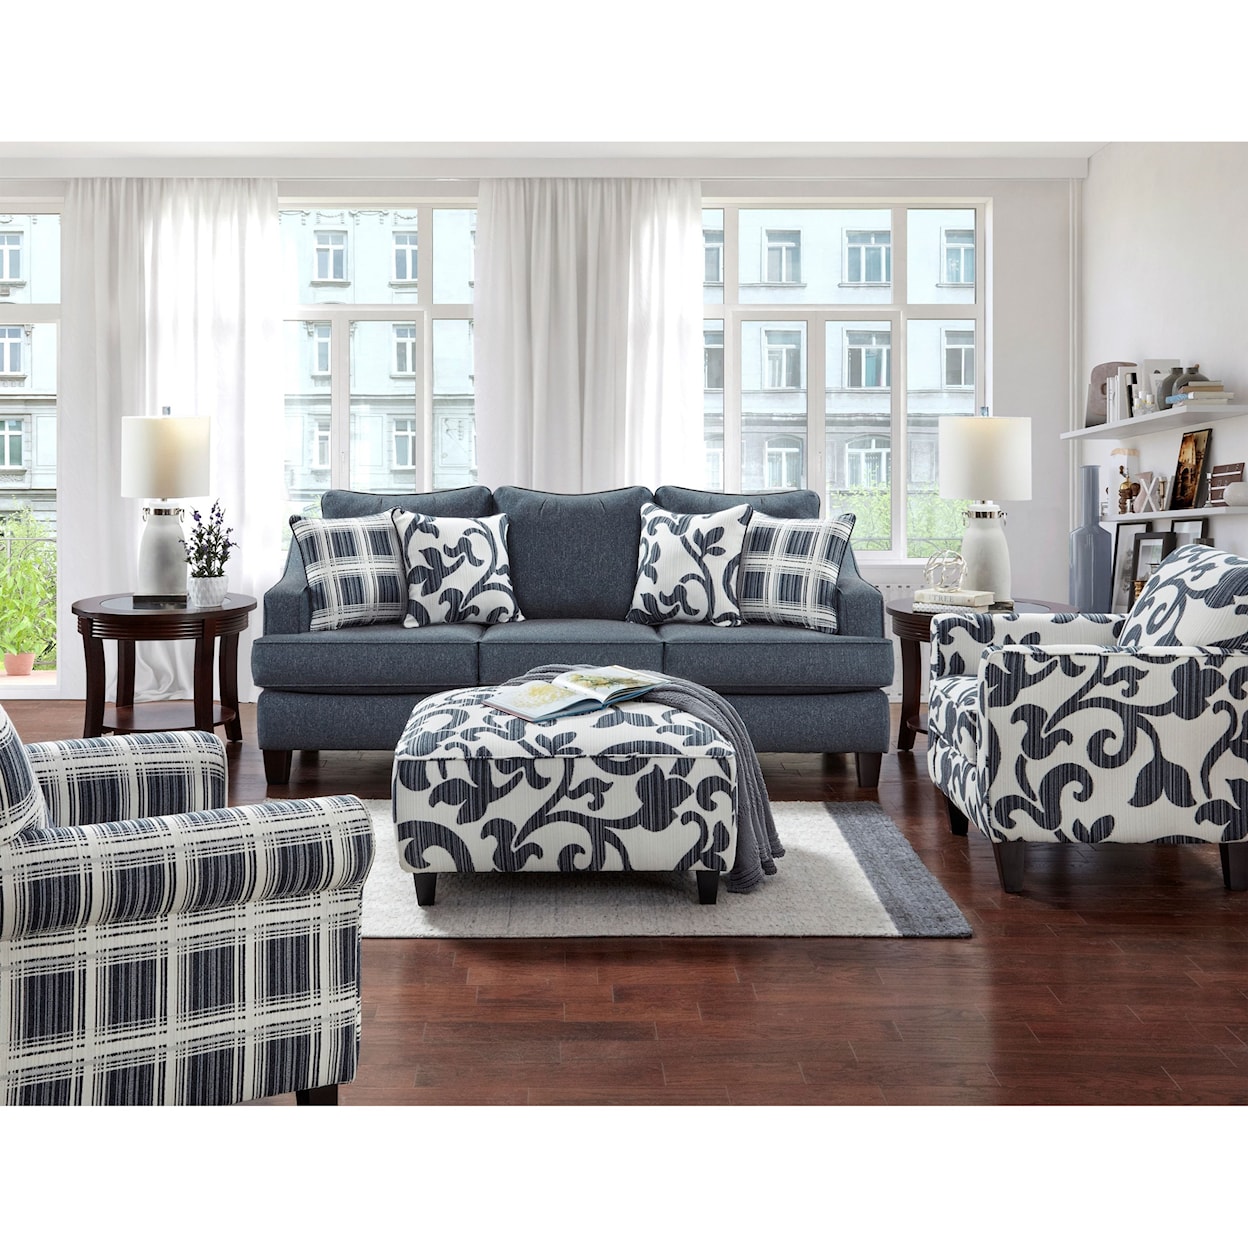 VFM Signature 2330 TRUTH OR DARE Living Room Group